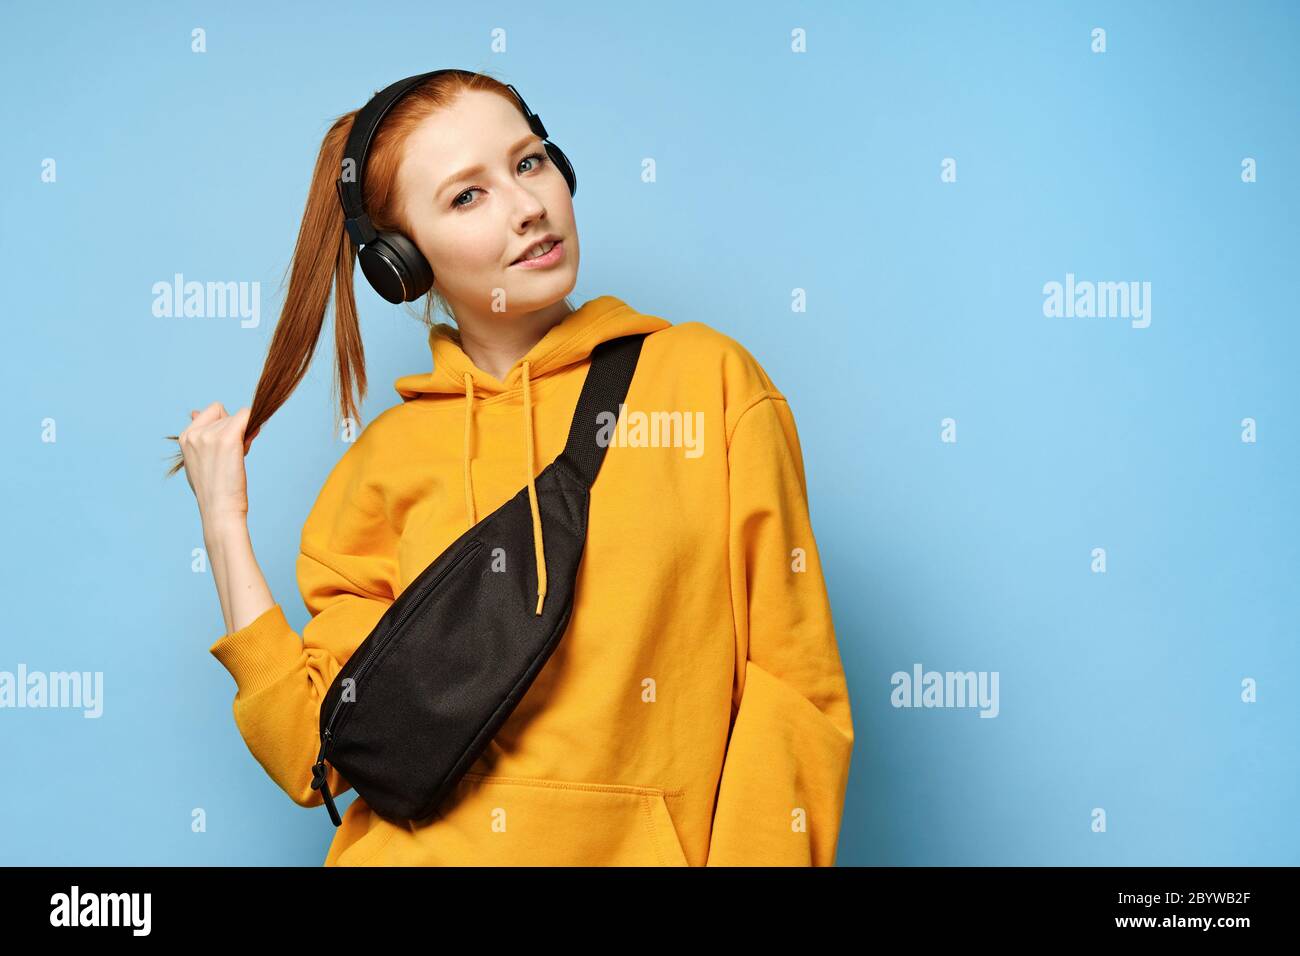 Red-haired girl in a yellow sweatshirt and with a black bag stands on a blue background, holding her tail with her hand Stock Photo